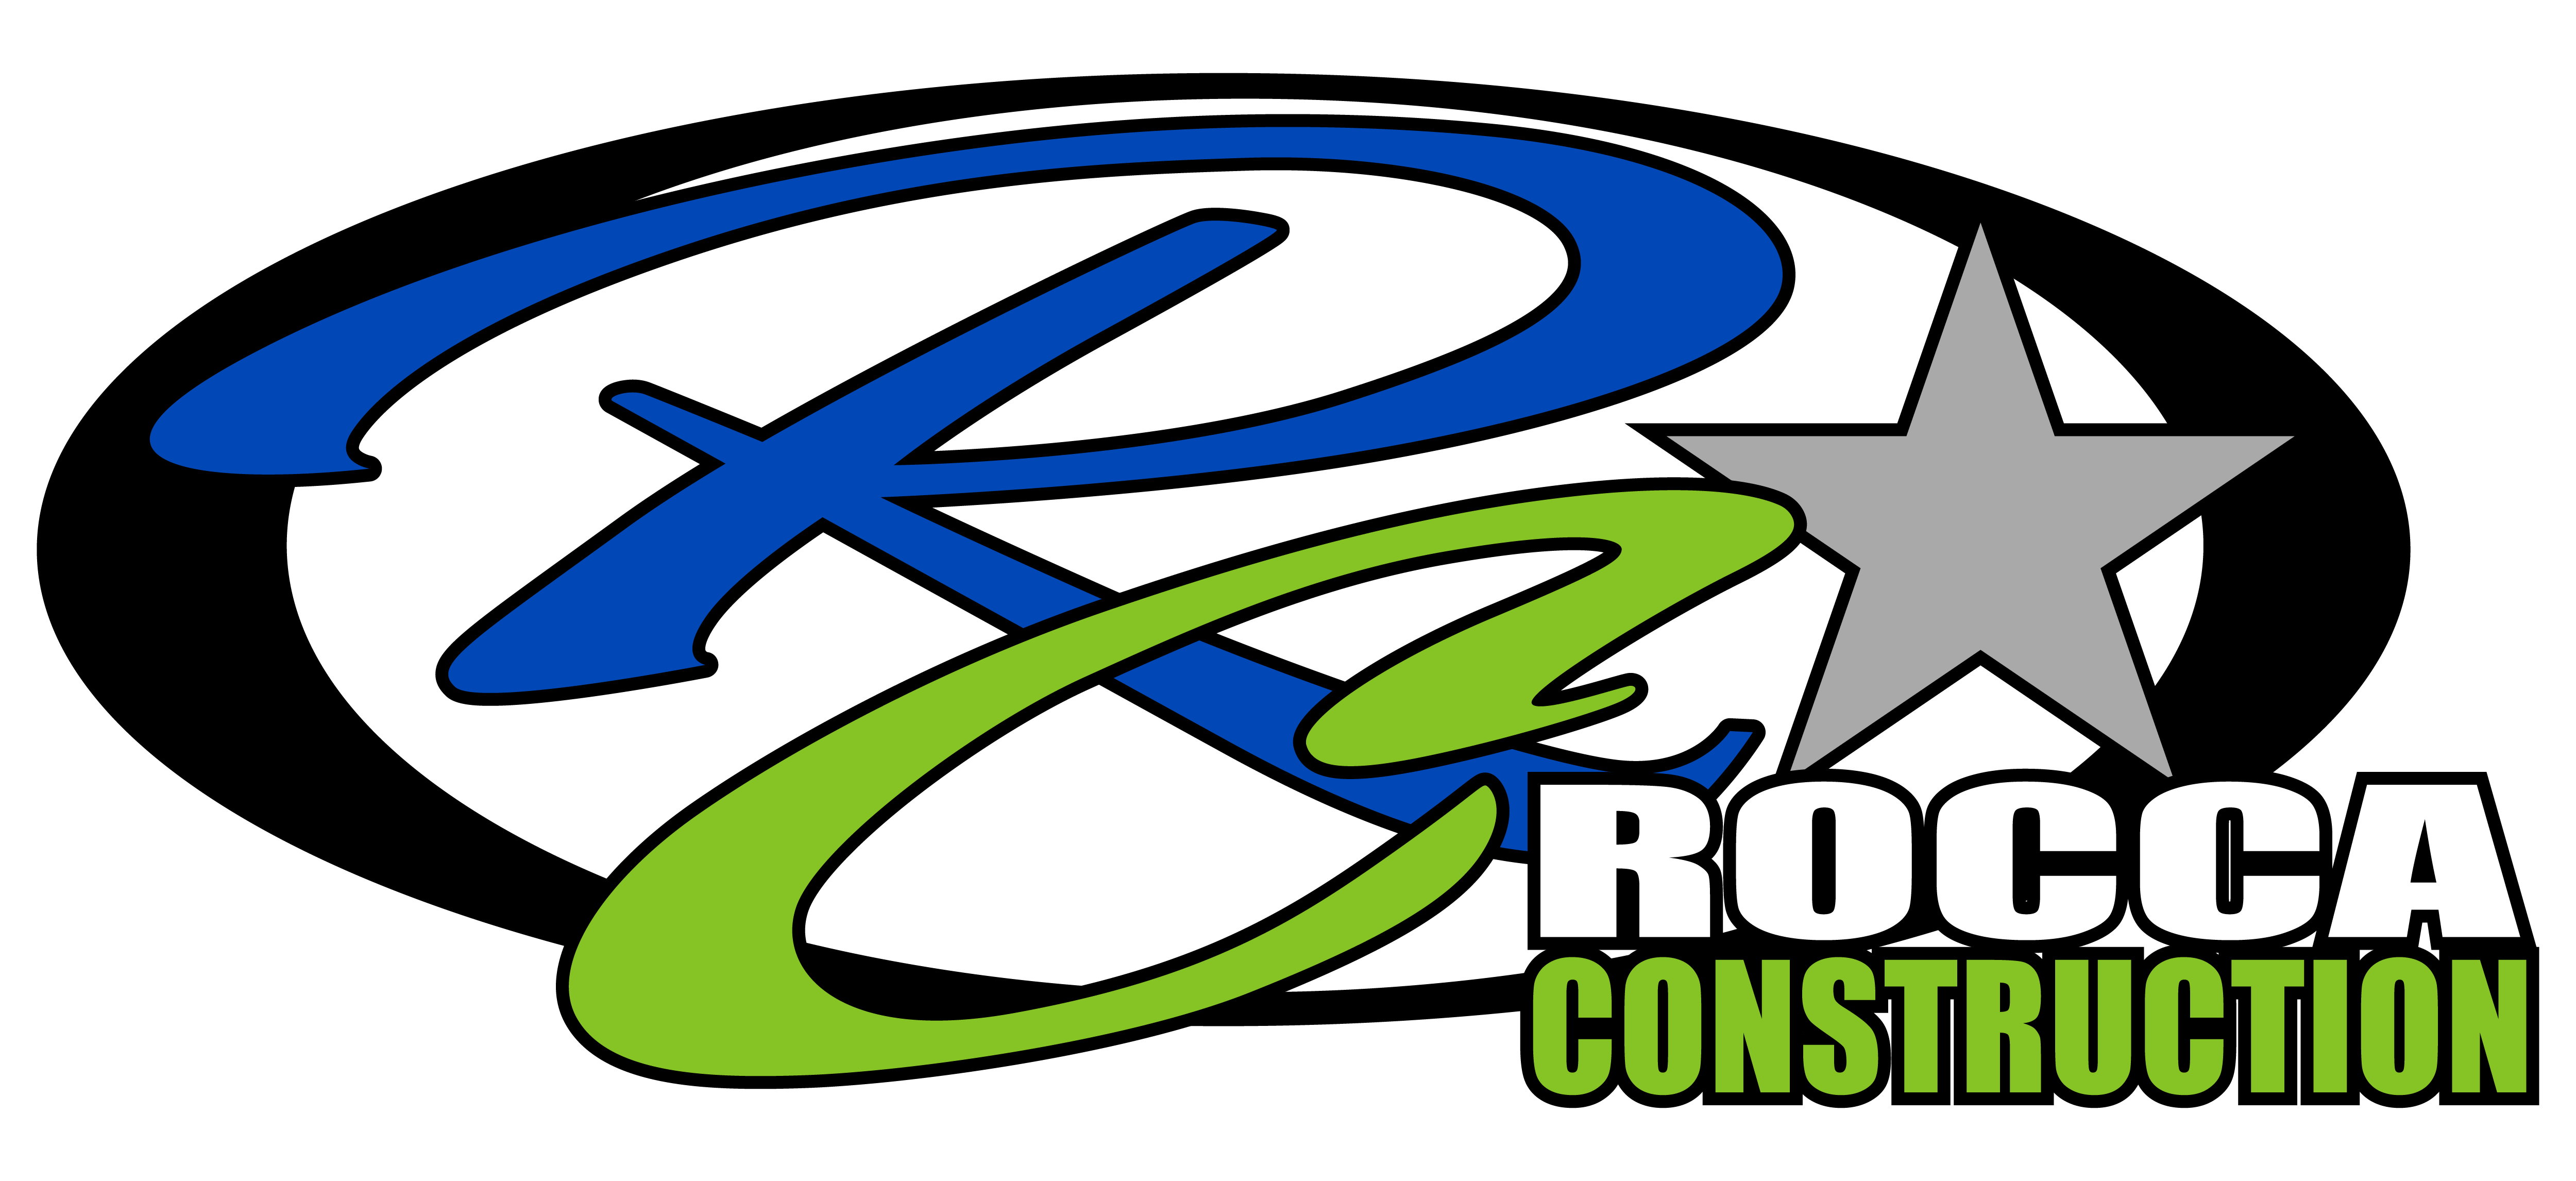 Rocca Construction specializes in Residential and Commercial construction.